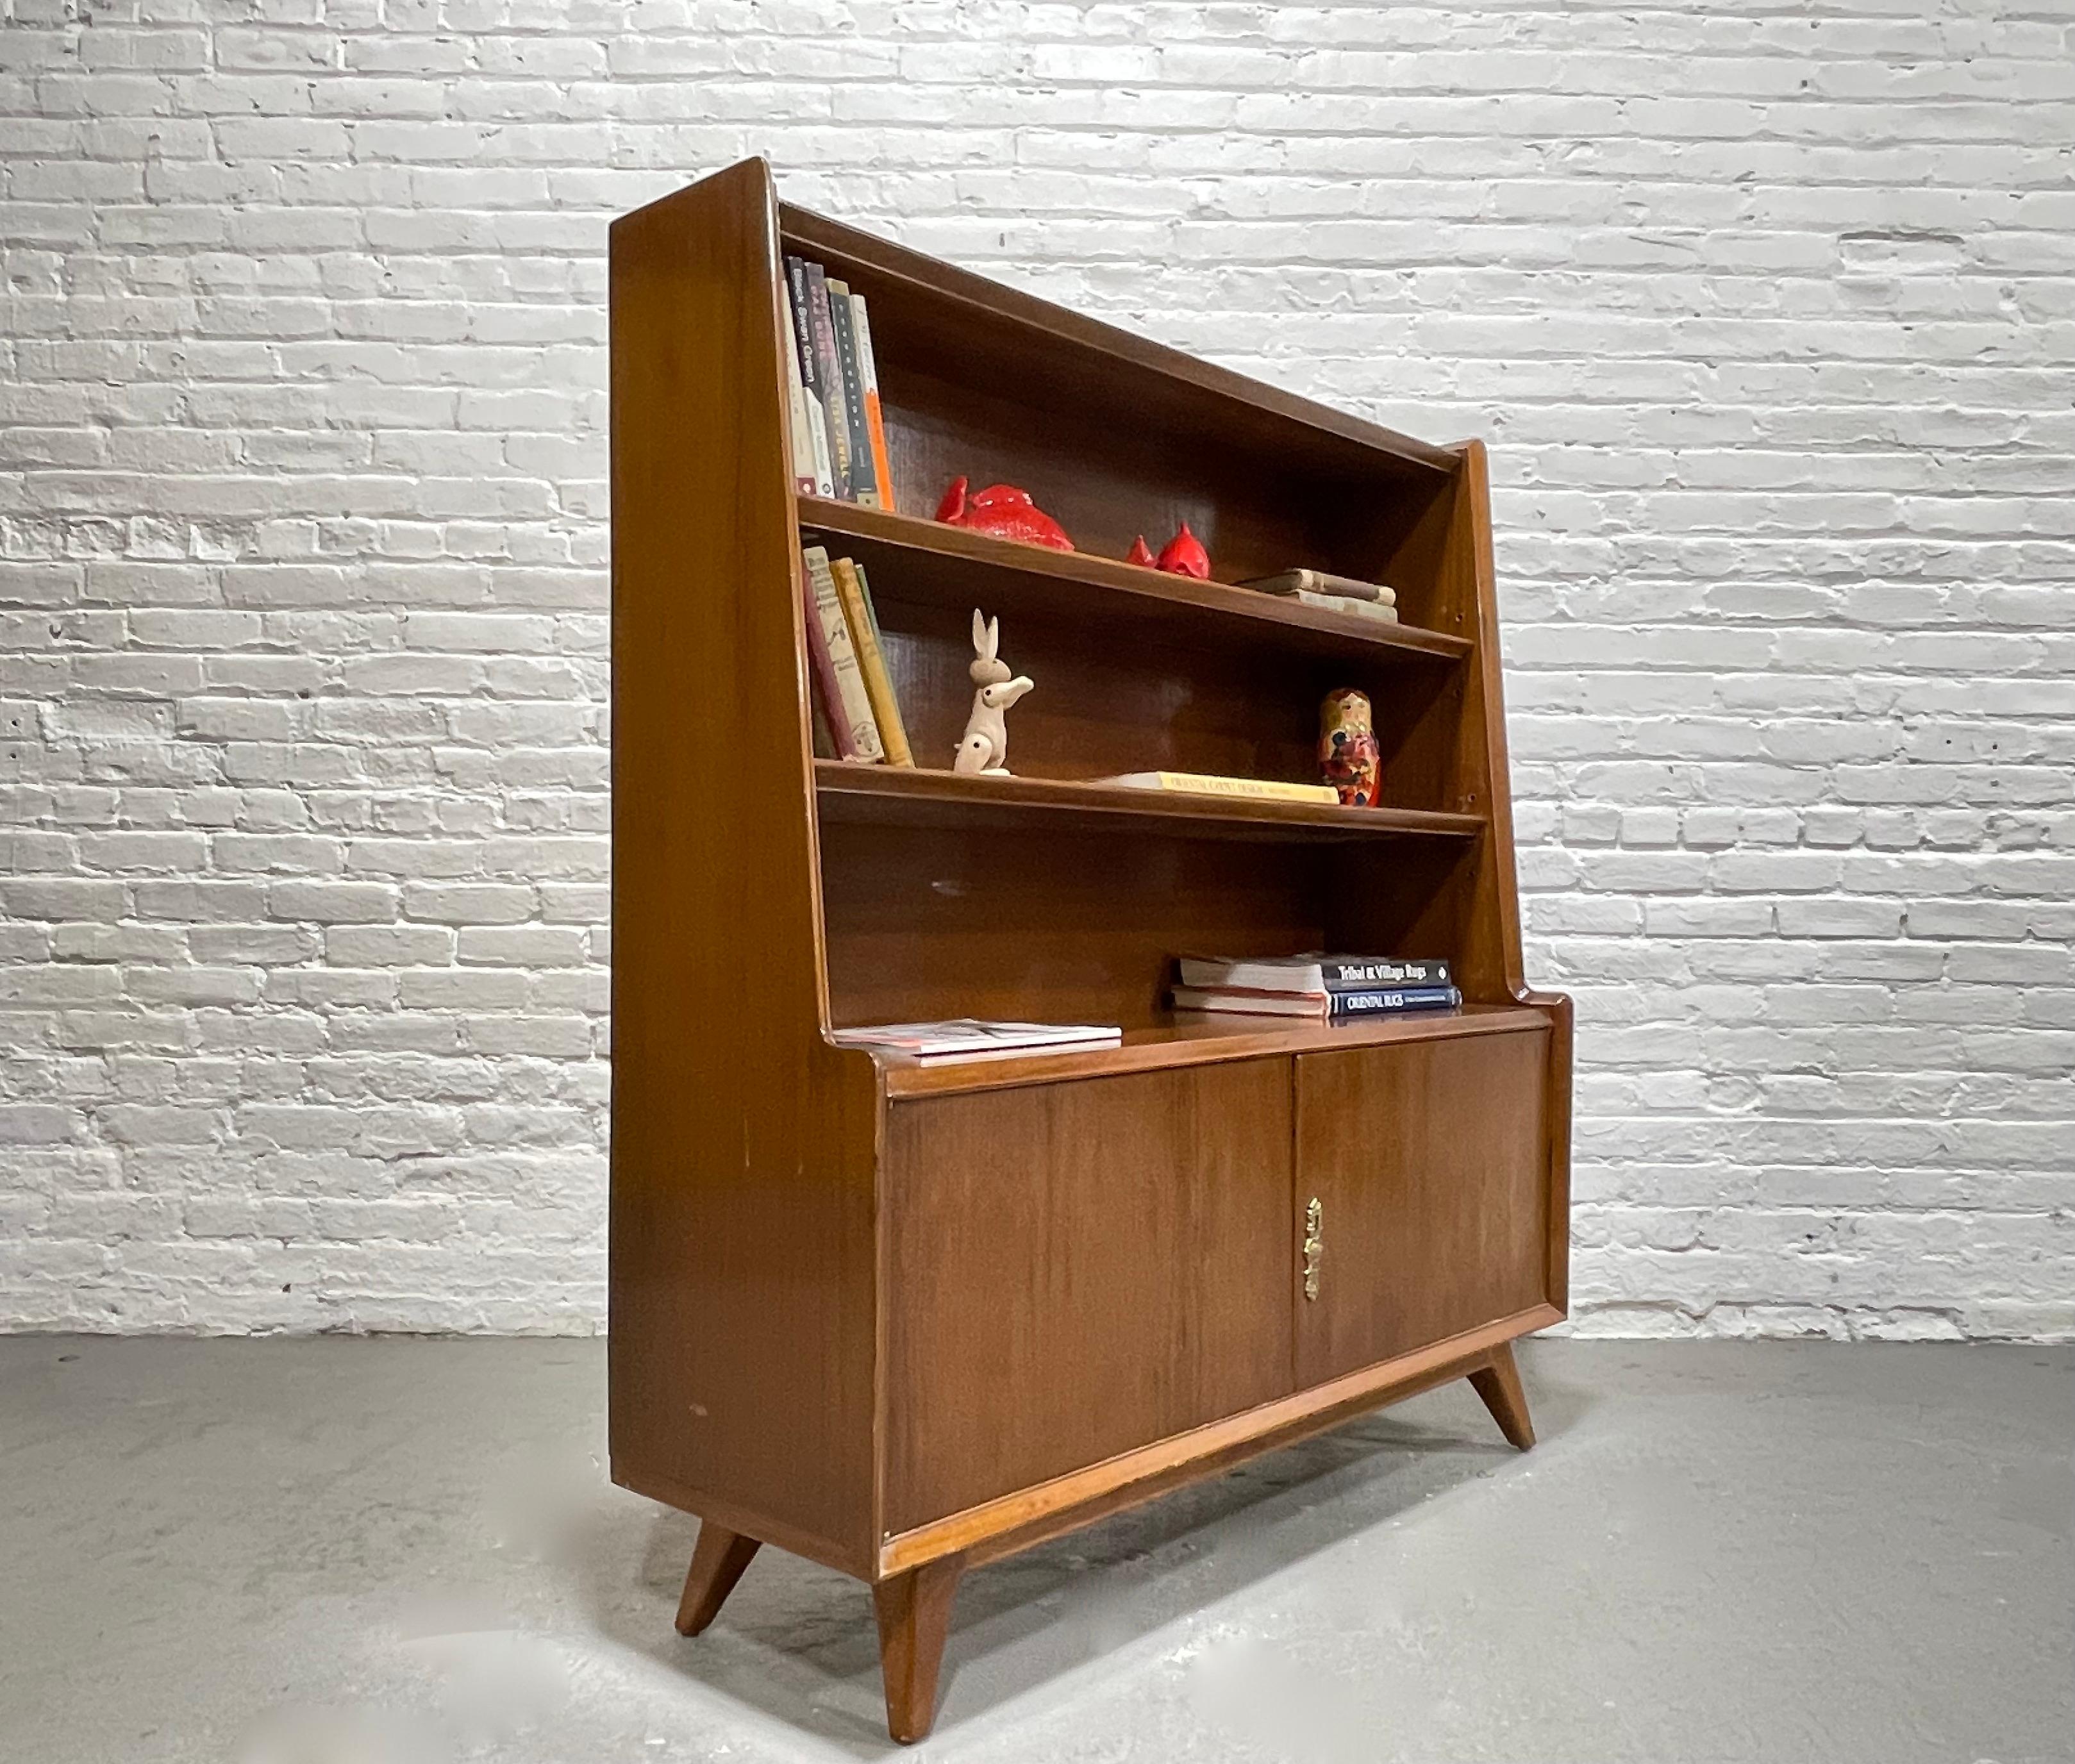 French Mid Century Modern Bookcase, c. 1950's. This incredible piece features plenty of shelving space for your books or collection and a wide open lower cabinet, perfect for storing vinyl, board games, toys or virtually anything else. Each shelf is